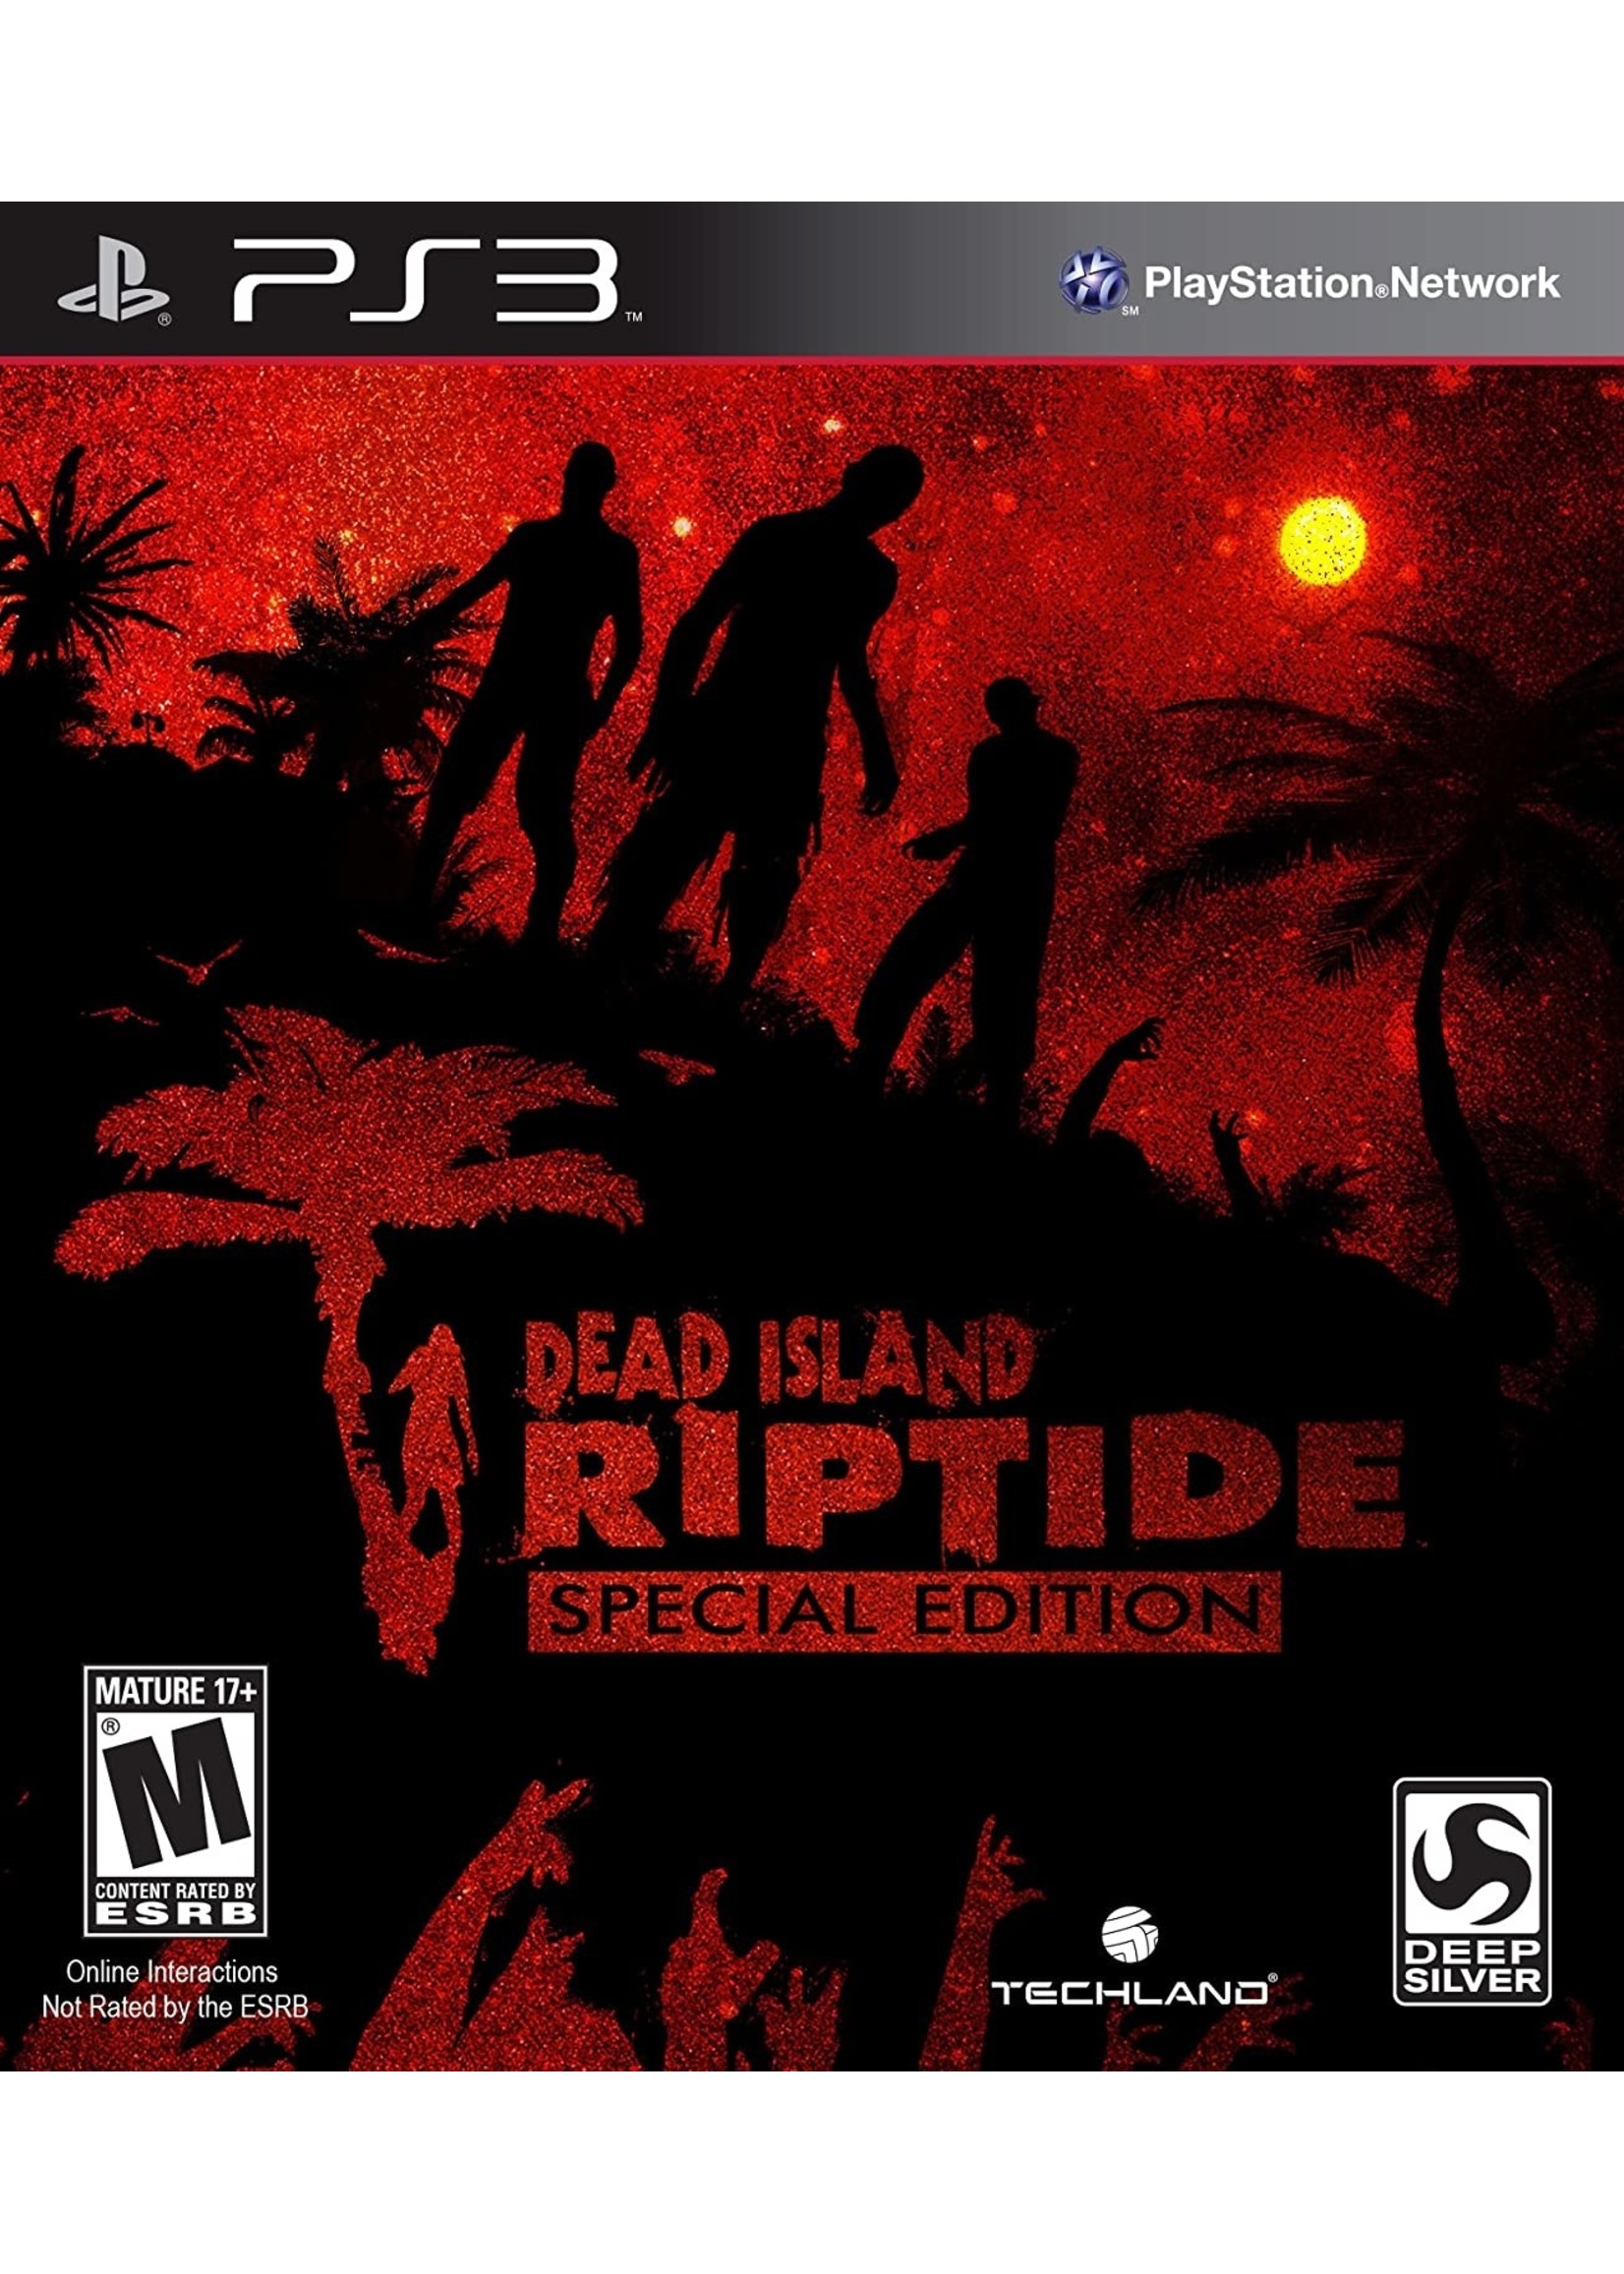 Sony Playstation 3 (PS3) Dead Island Riptide Special Edition